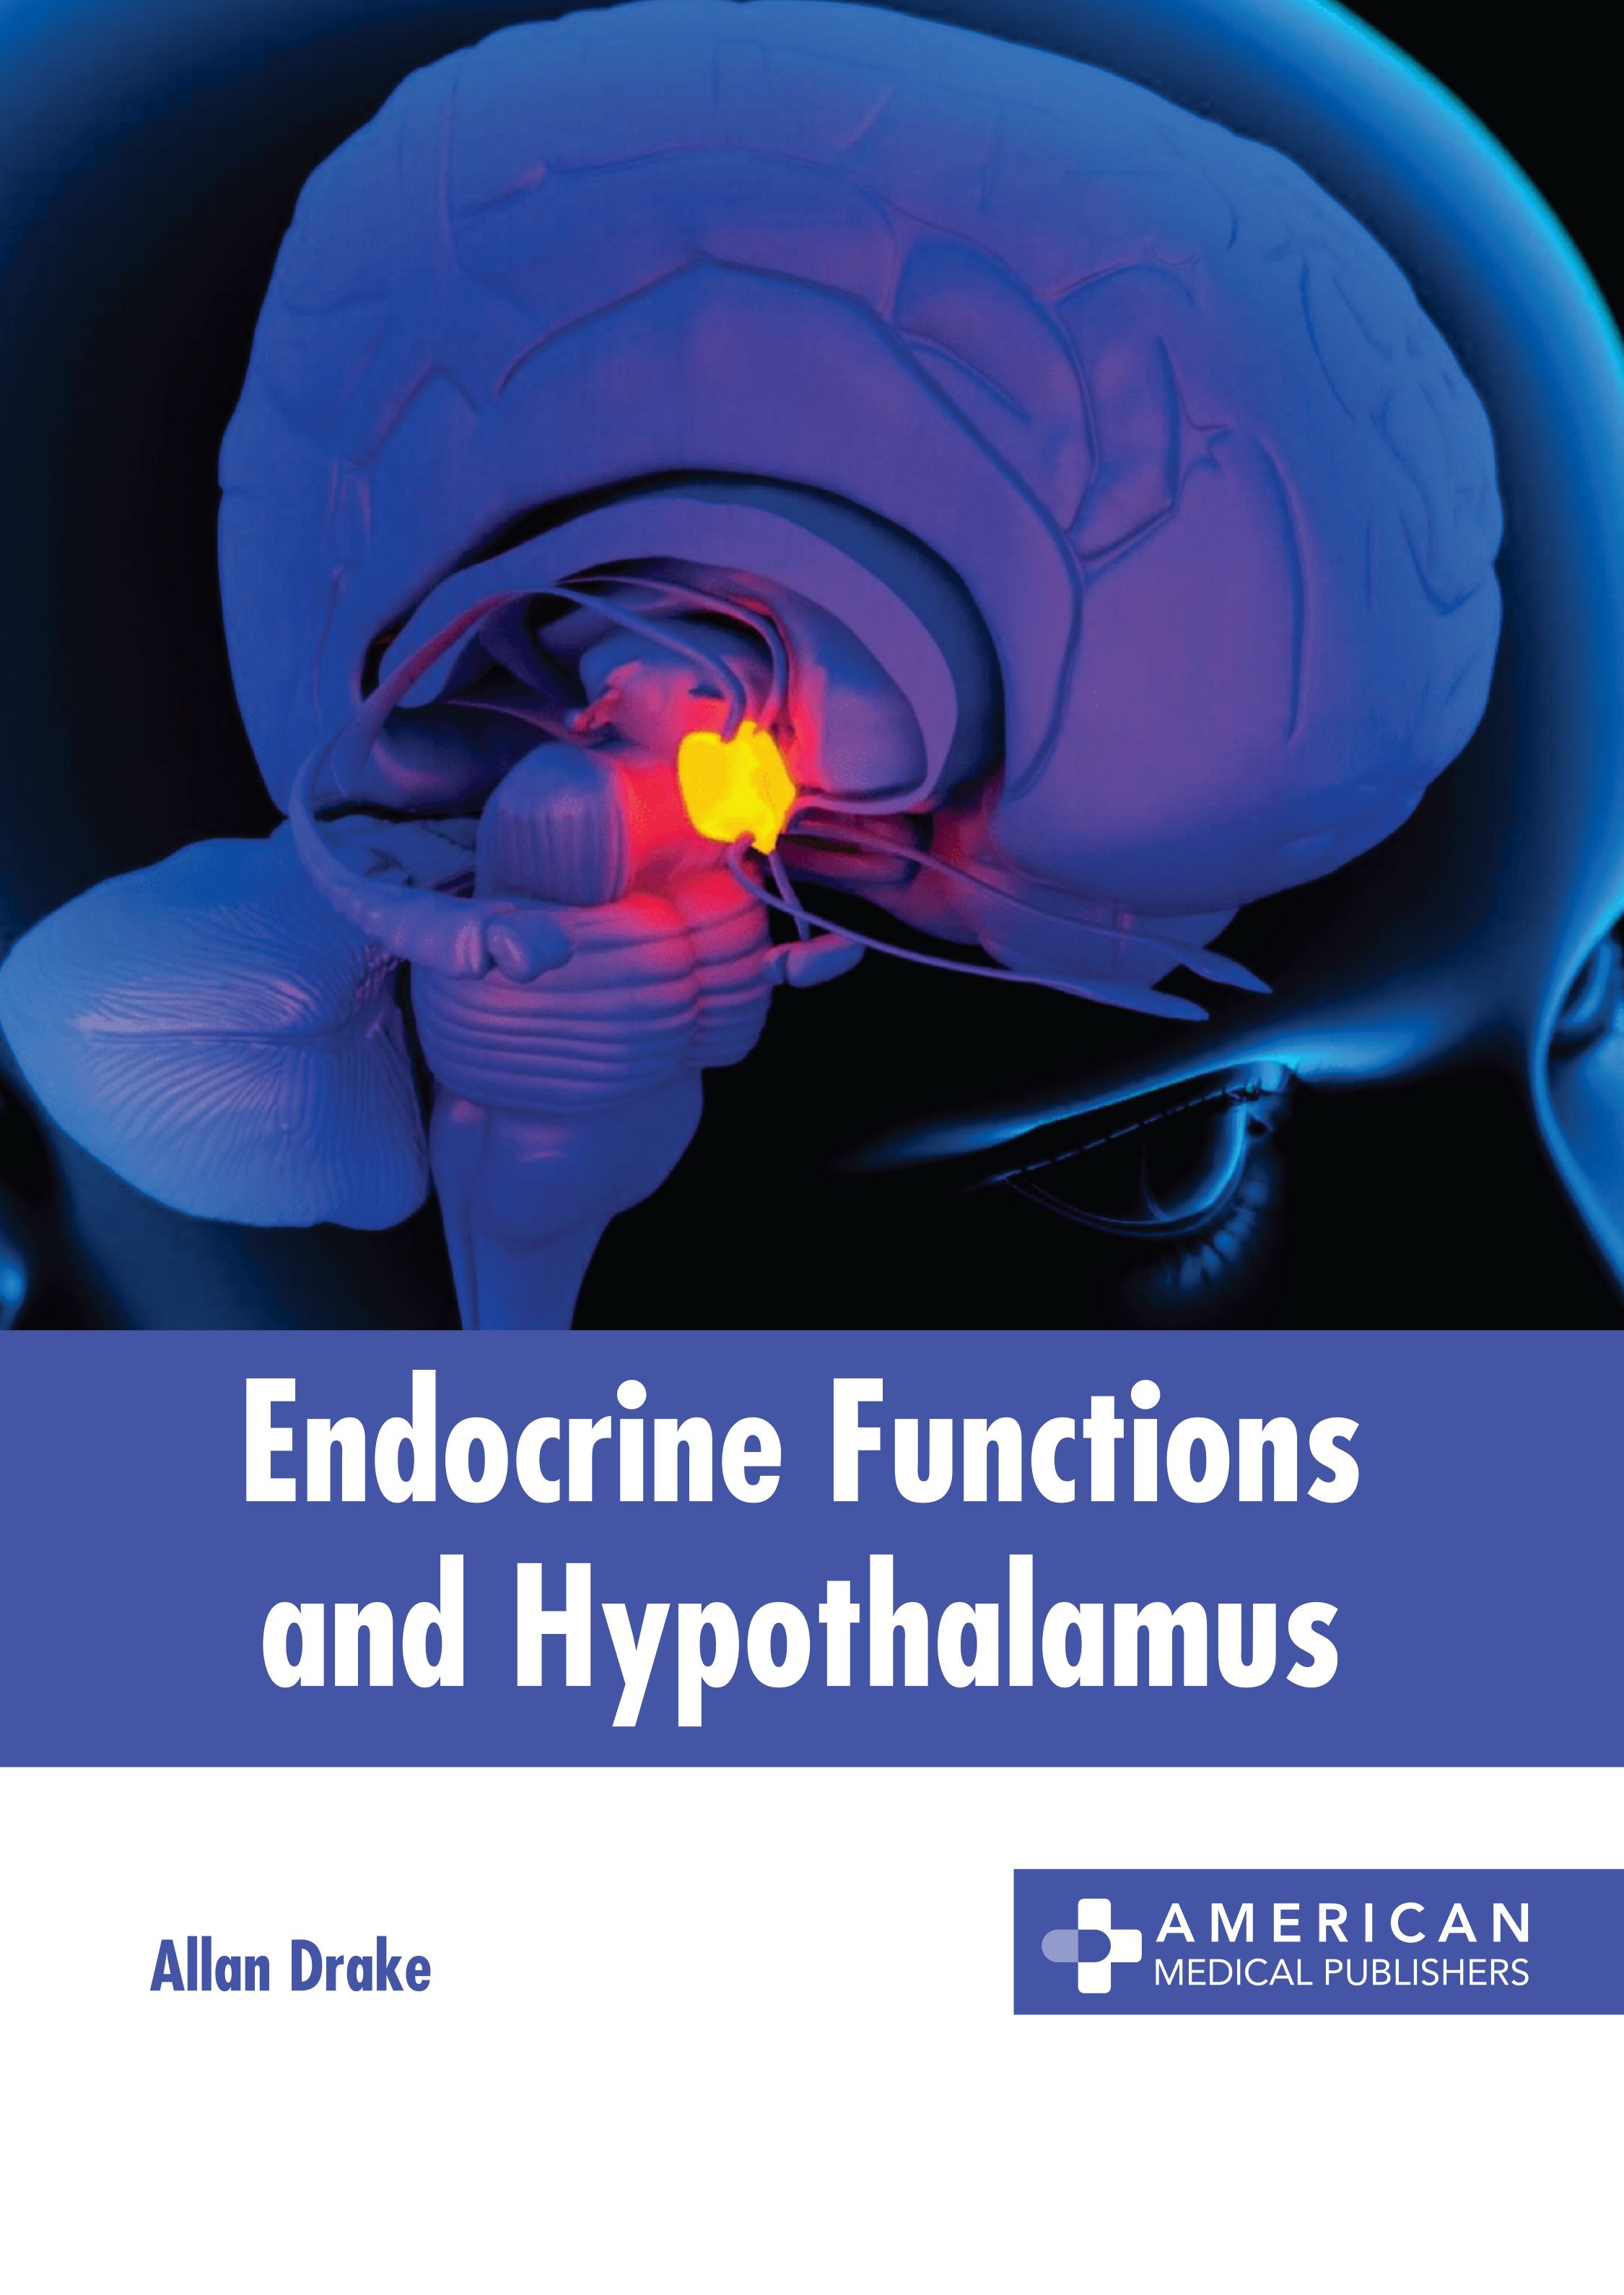 ENDOCRINE FUNCTIONS AND HYPOTHALAMUS